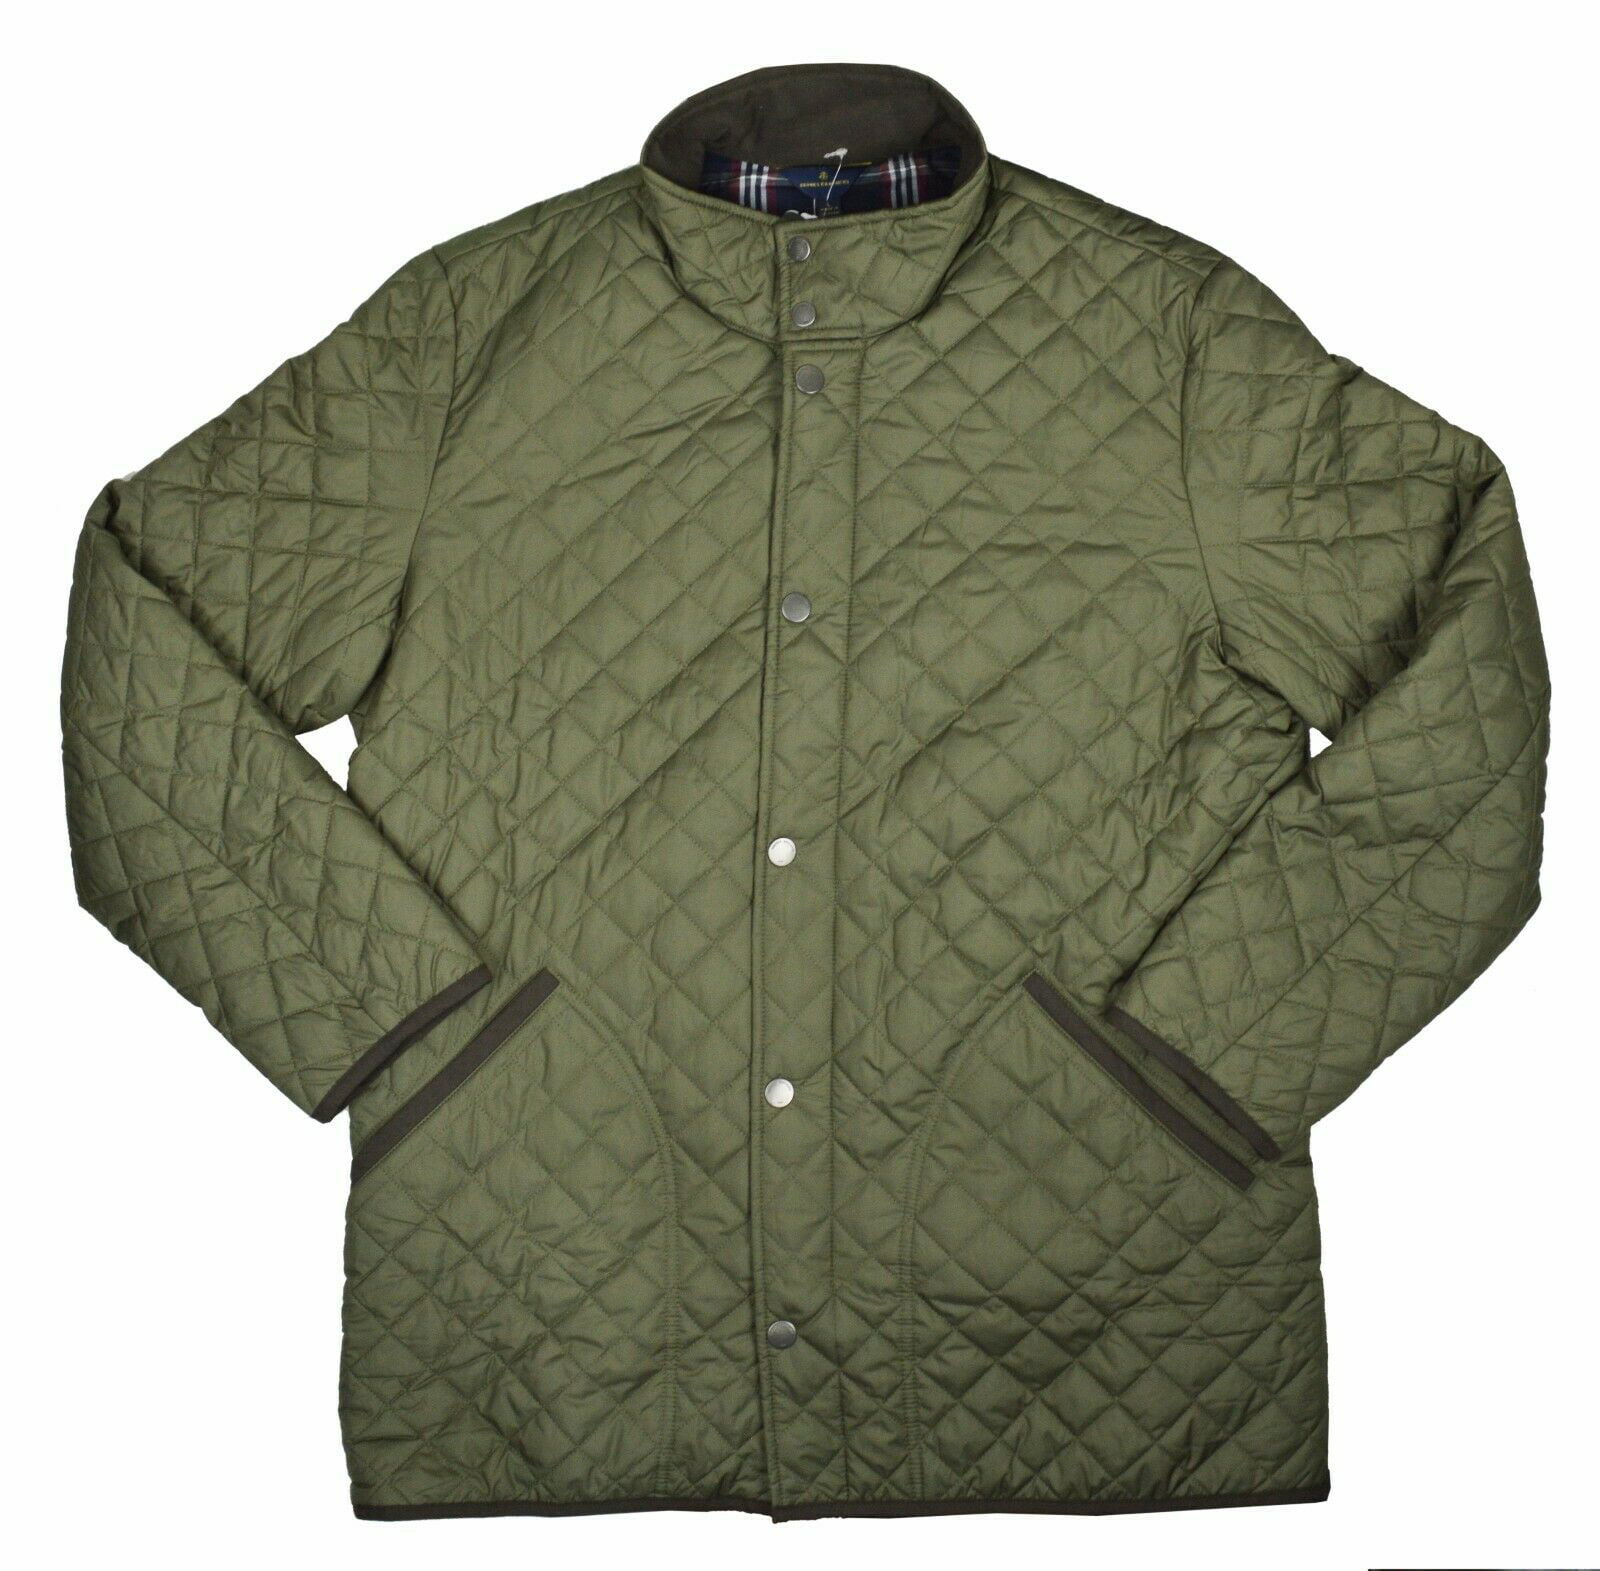 Brooks Brothers - New Brooks Brothers Men's Diamond Quilted Jacket ...